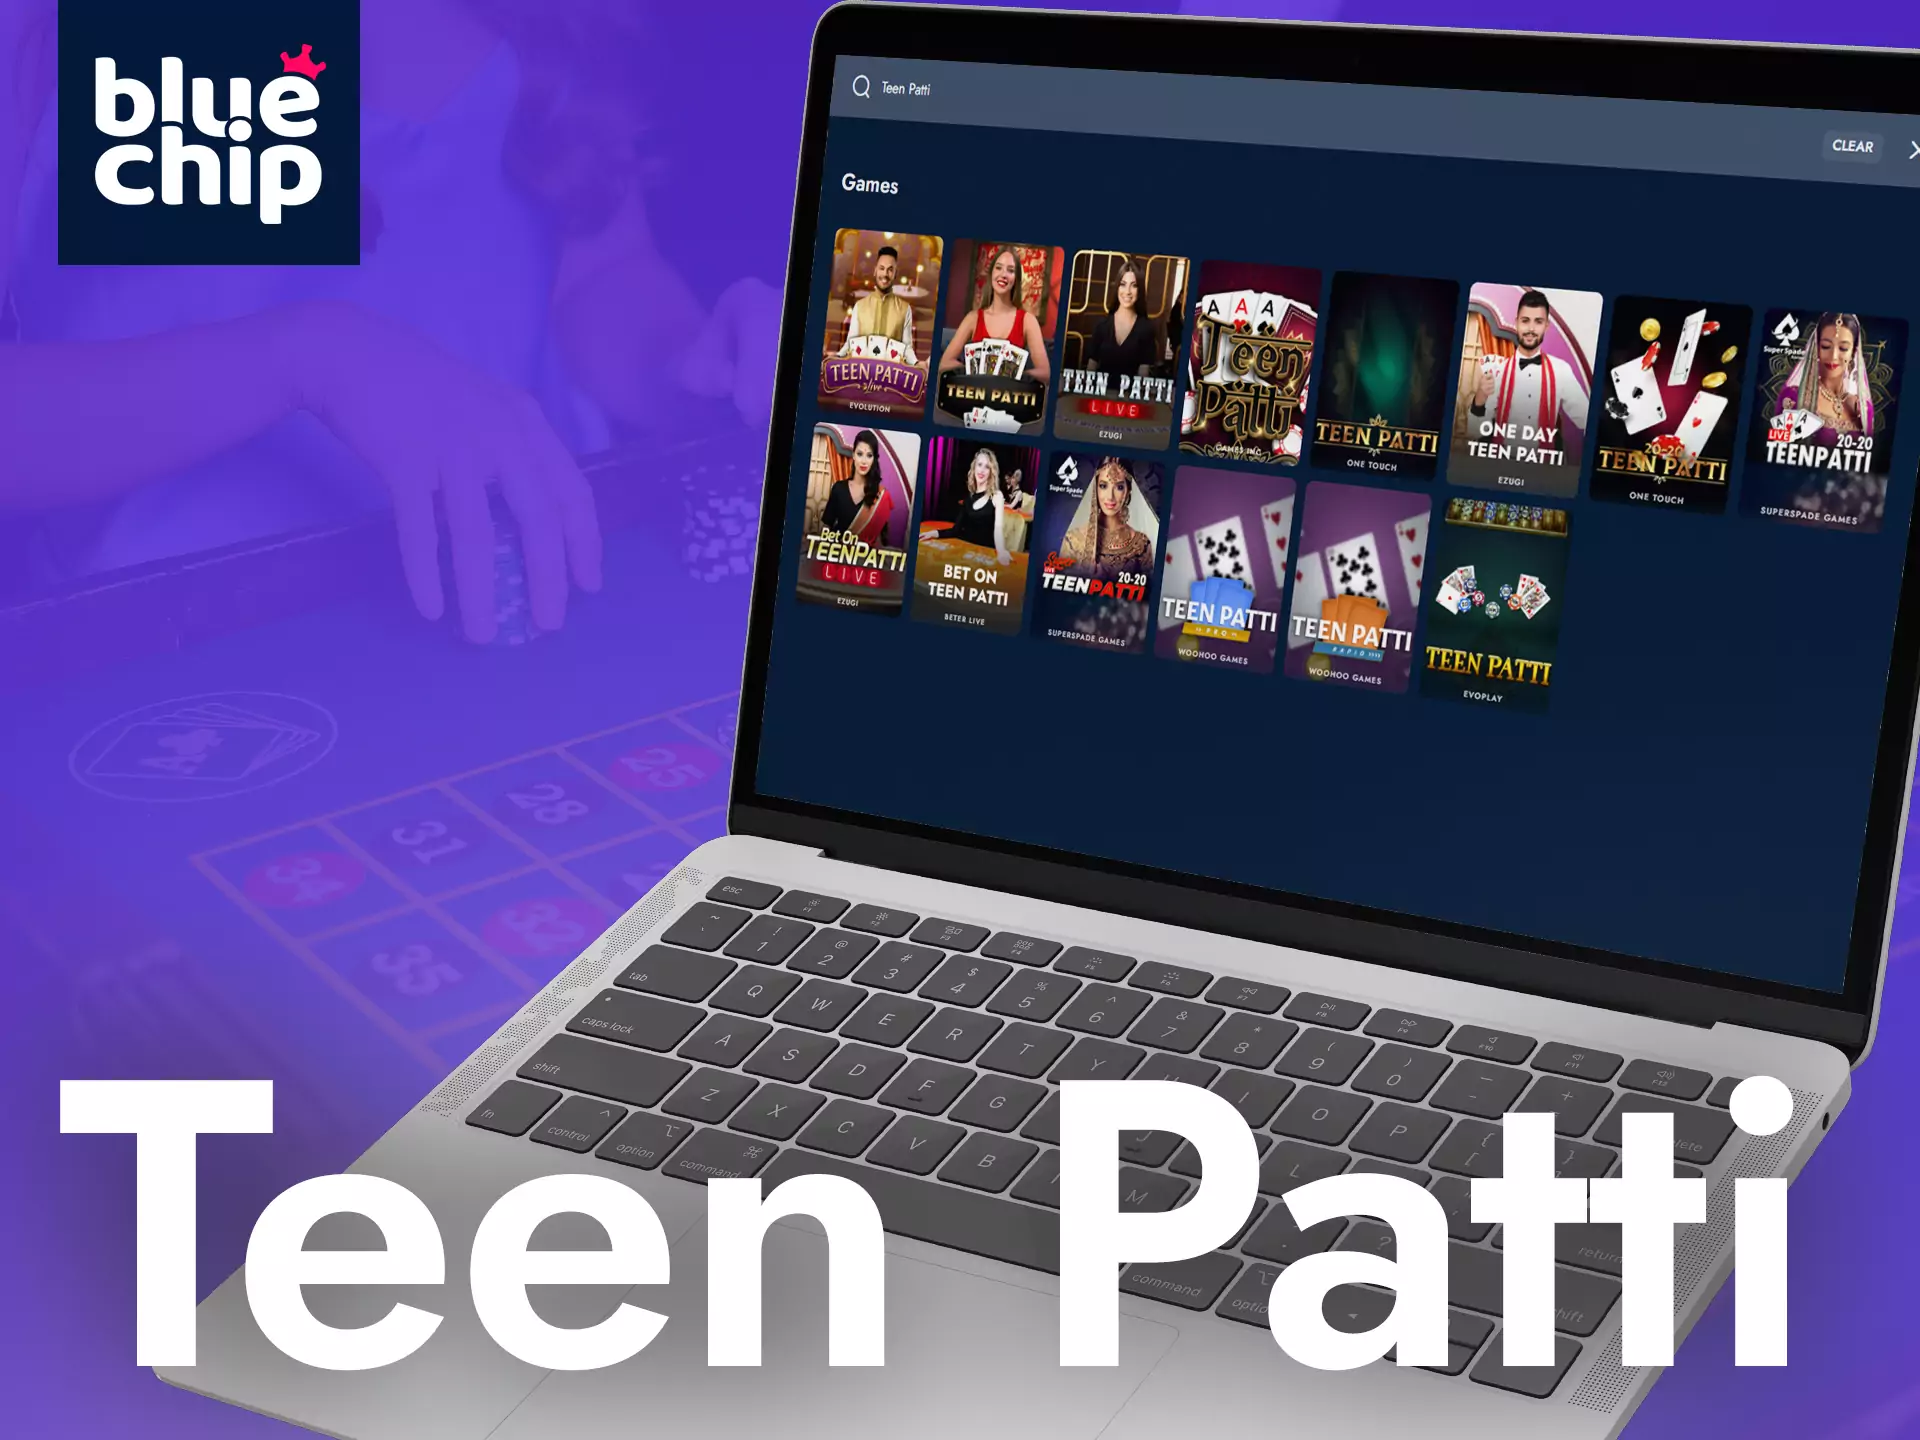 Teen Patti is another popular game you can play in the Bluechip Casino.